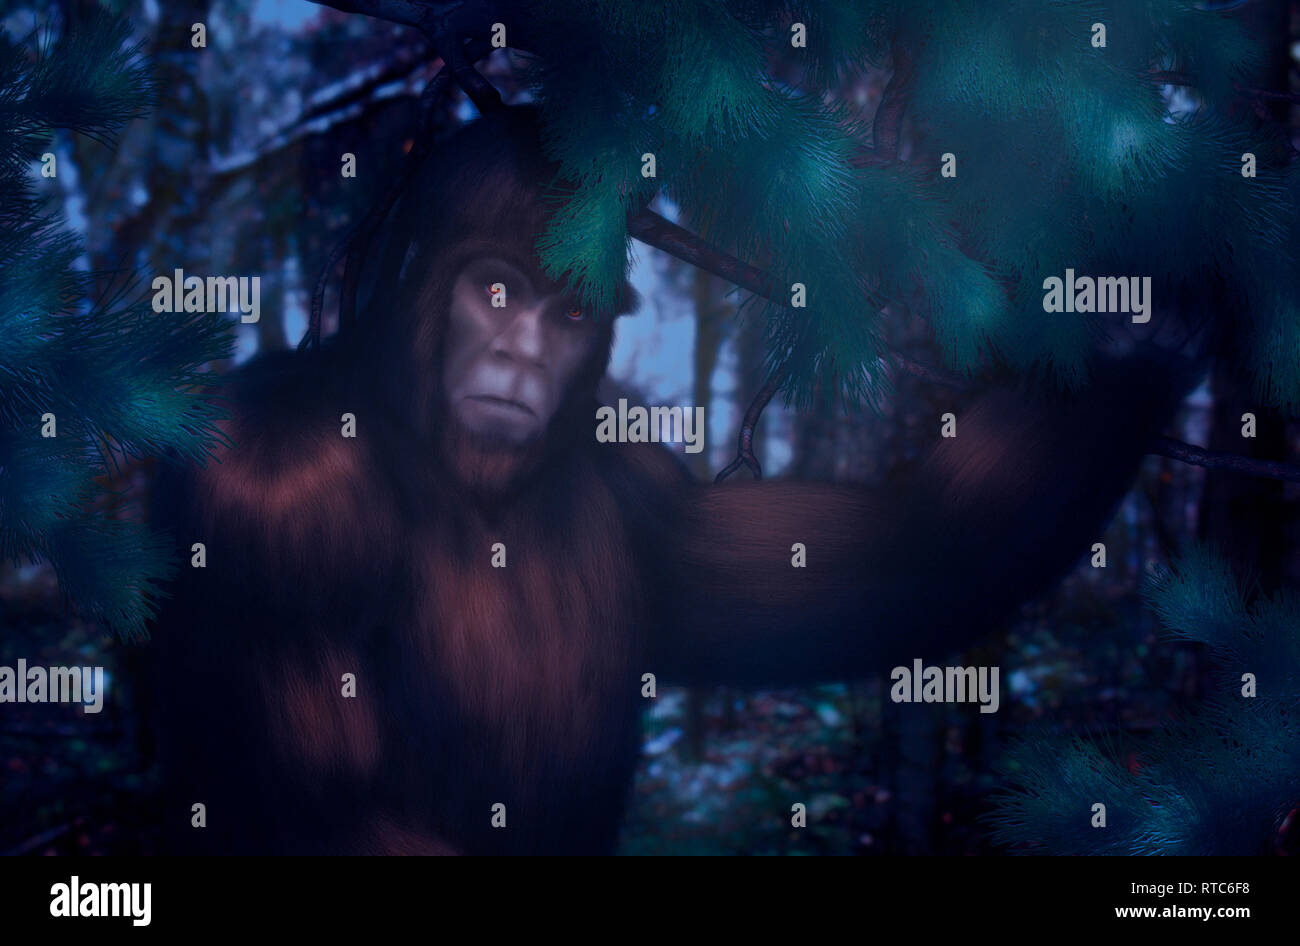 Bigfoot hiding behind a pine branch in the forest on a moonlit night. Stock Photo